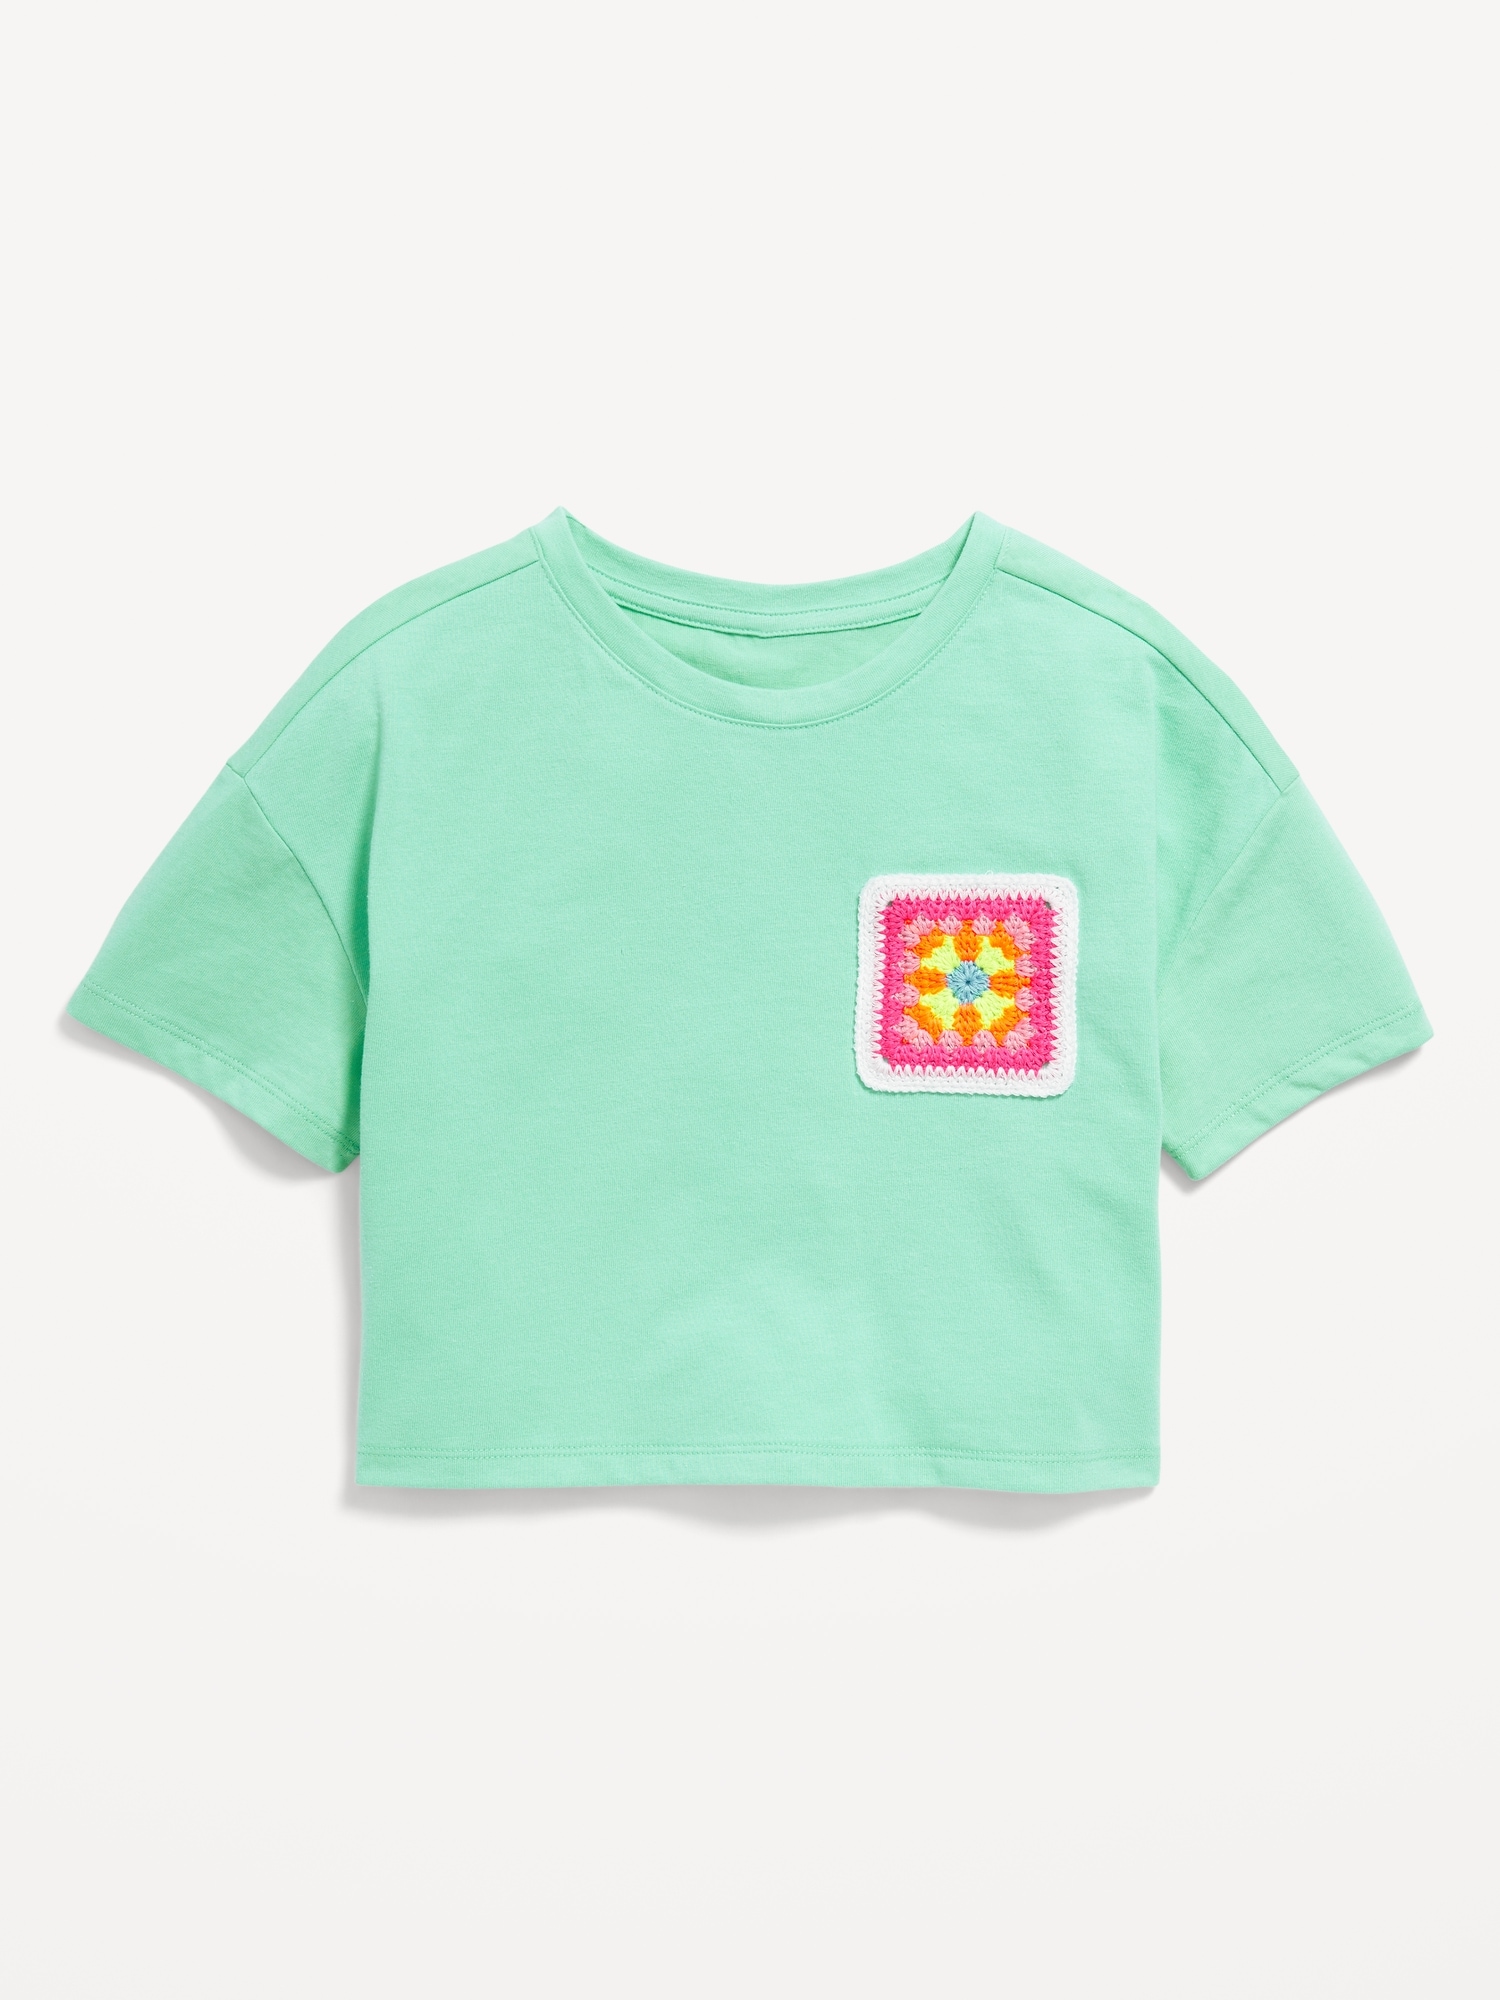 Oversized Embroidered Graphic T-Shirt for Girls